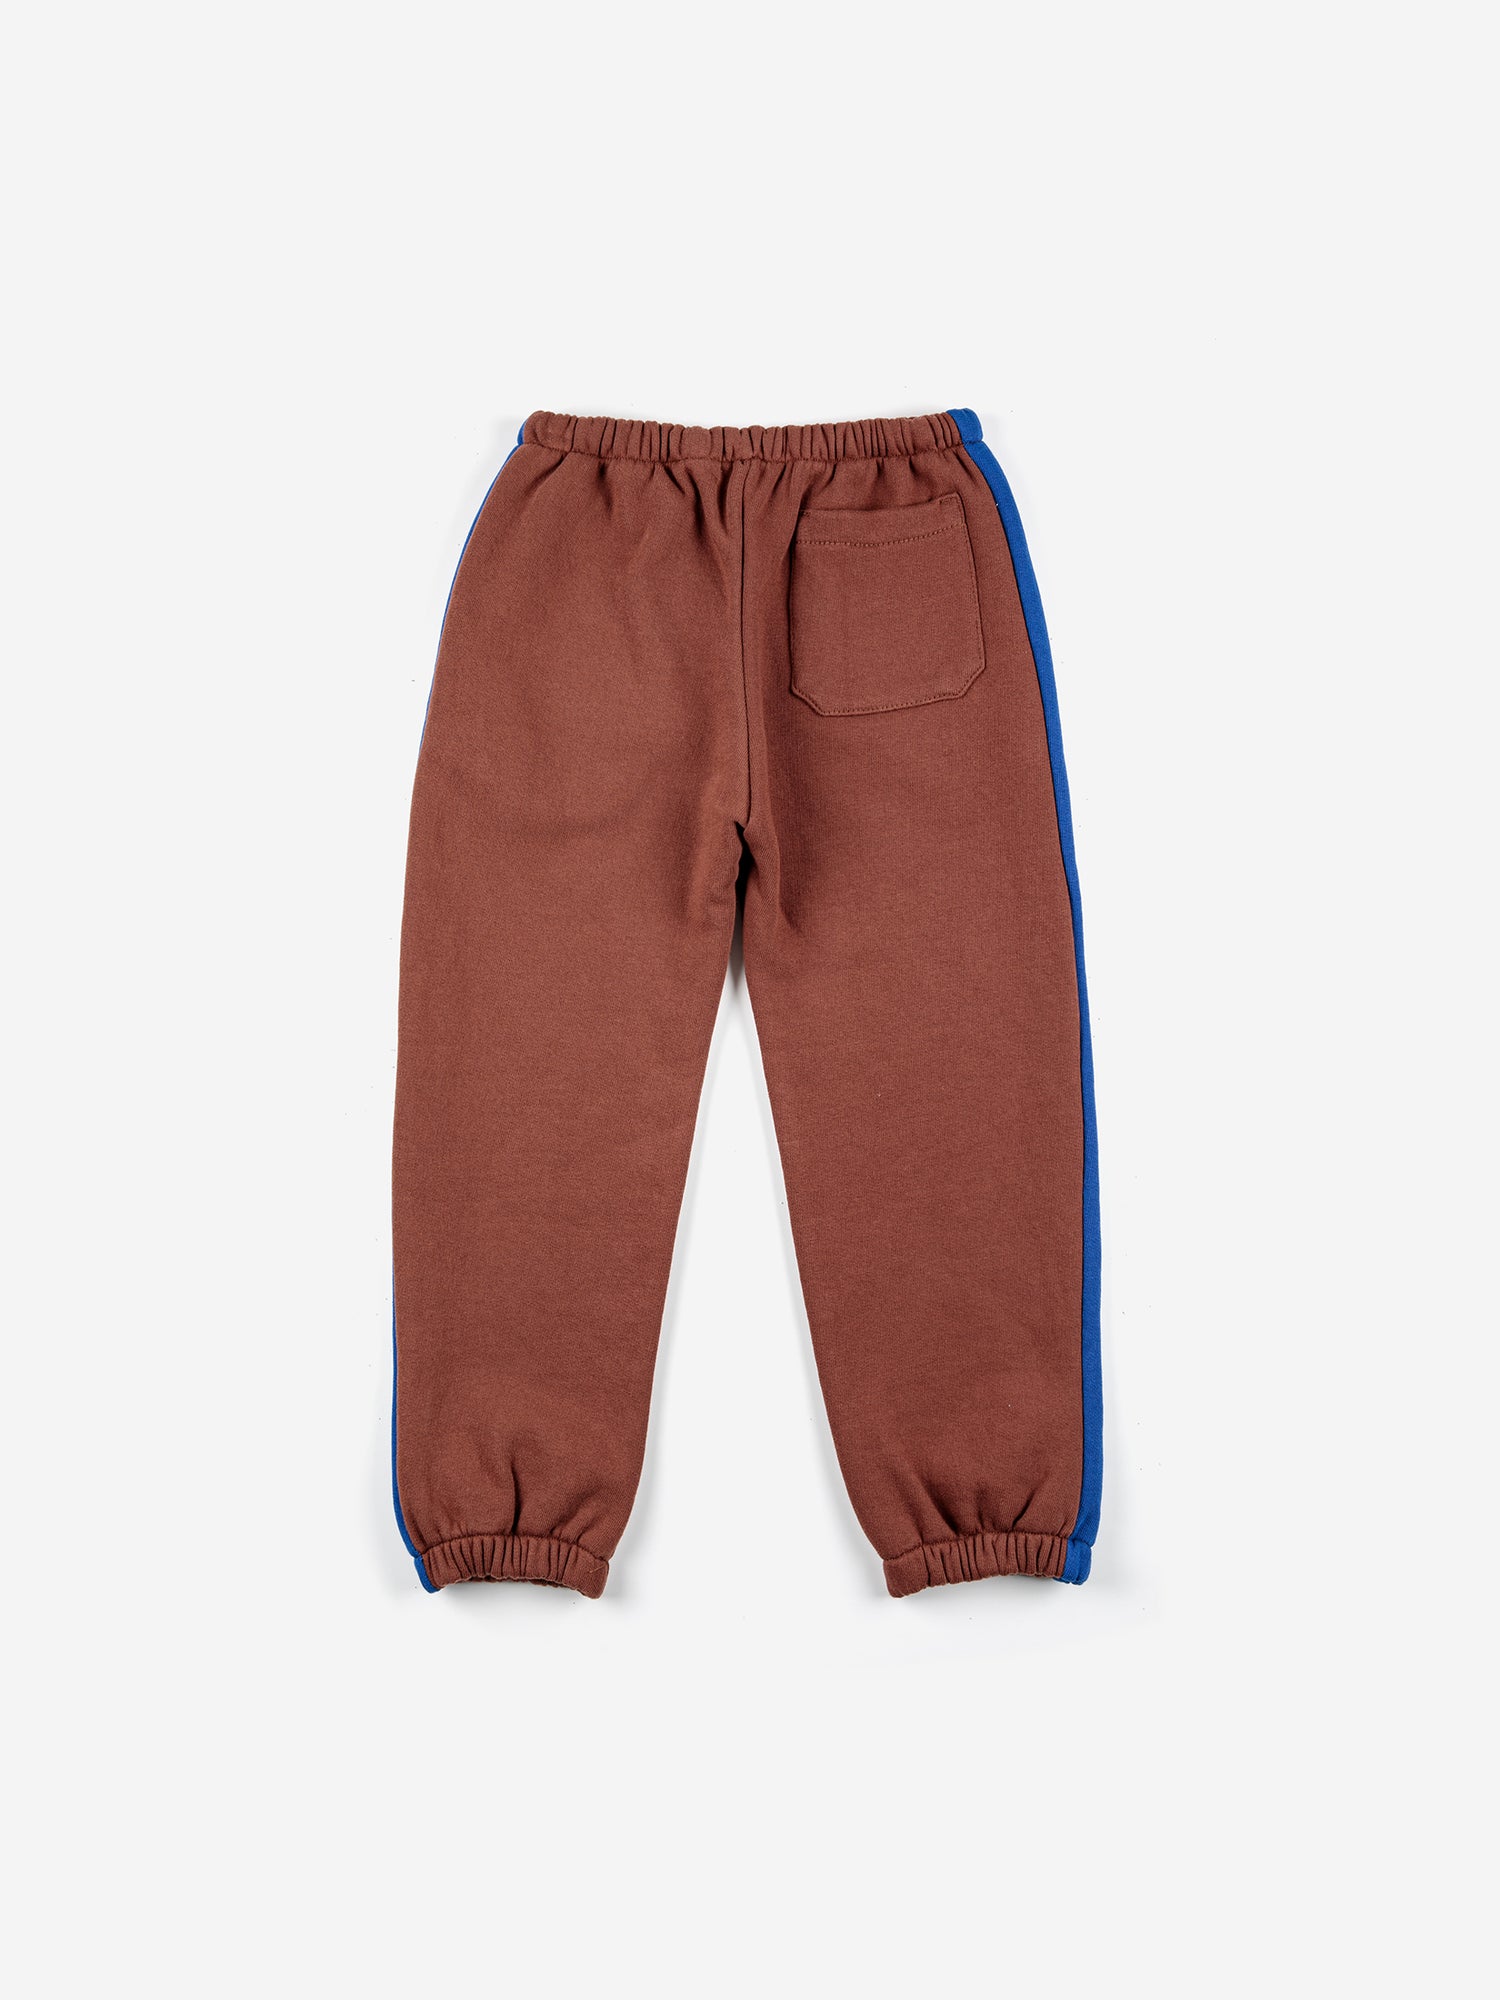 BC Label Jogging Pants by Bobo Choses. 100% organic cotton brown & blue striped joggers. Designed with adjustable waistband, ankle length and fleece lined. It has a baggy fit.   Made ethically and sustainably in Portugal for Bobo Choses.